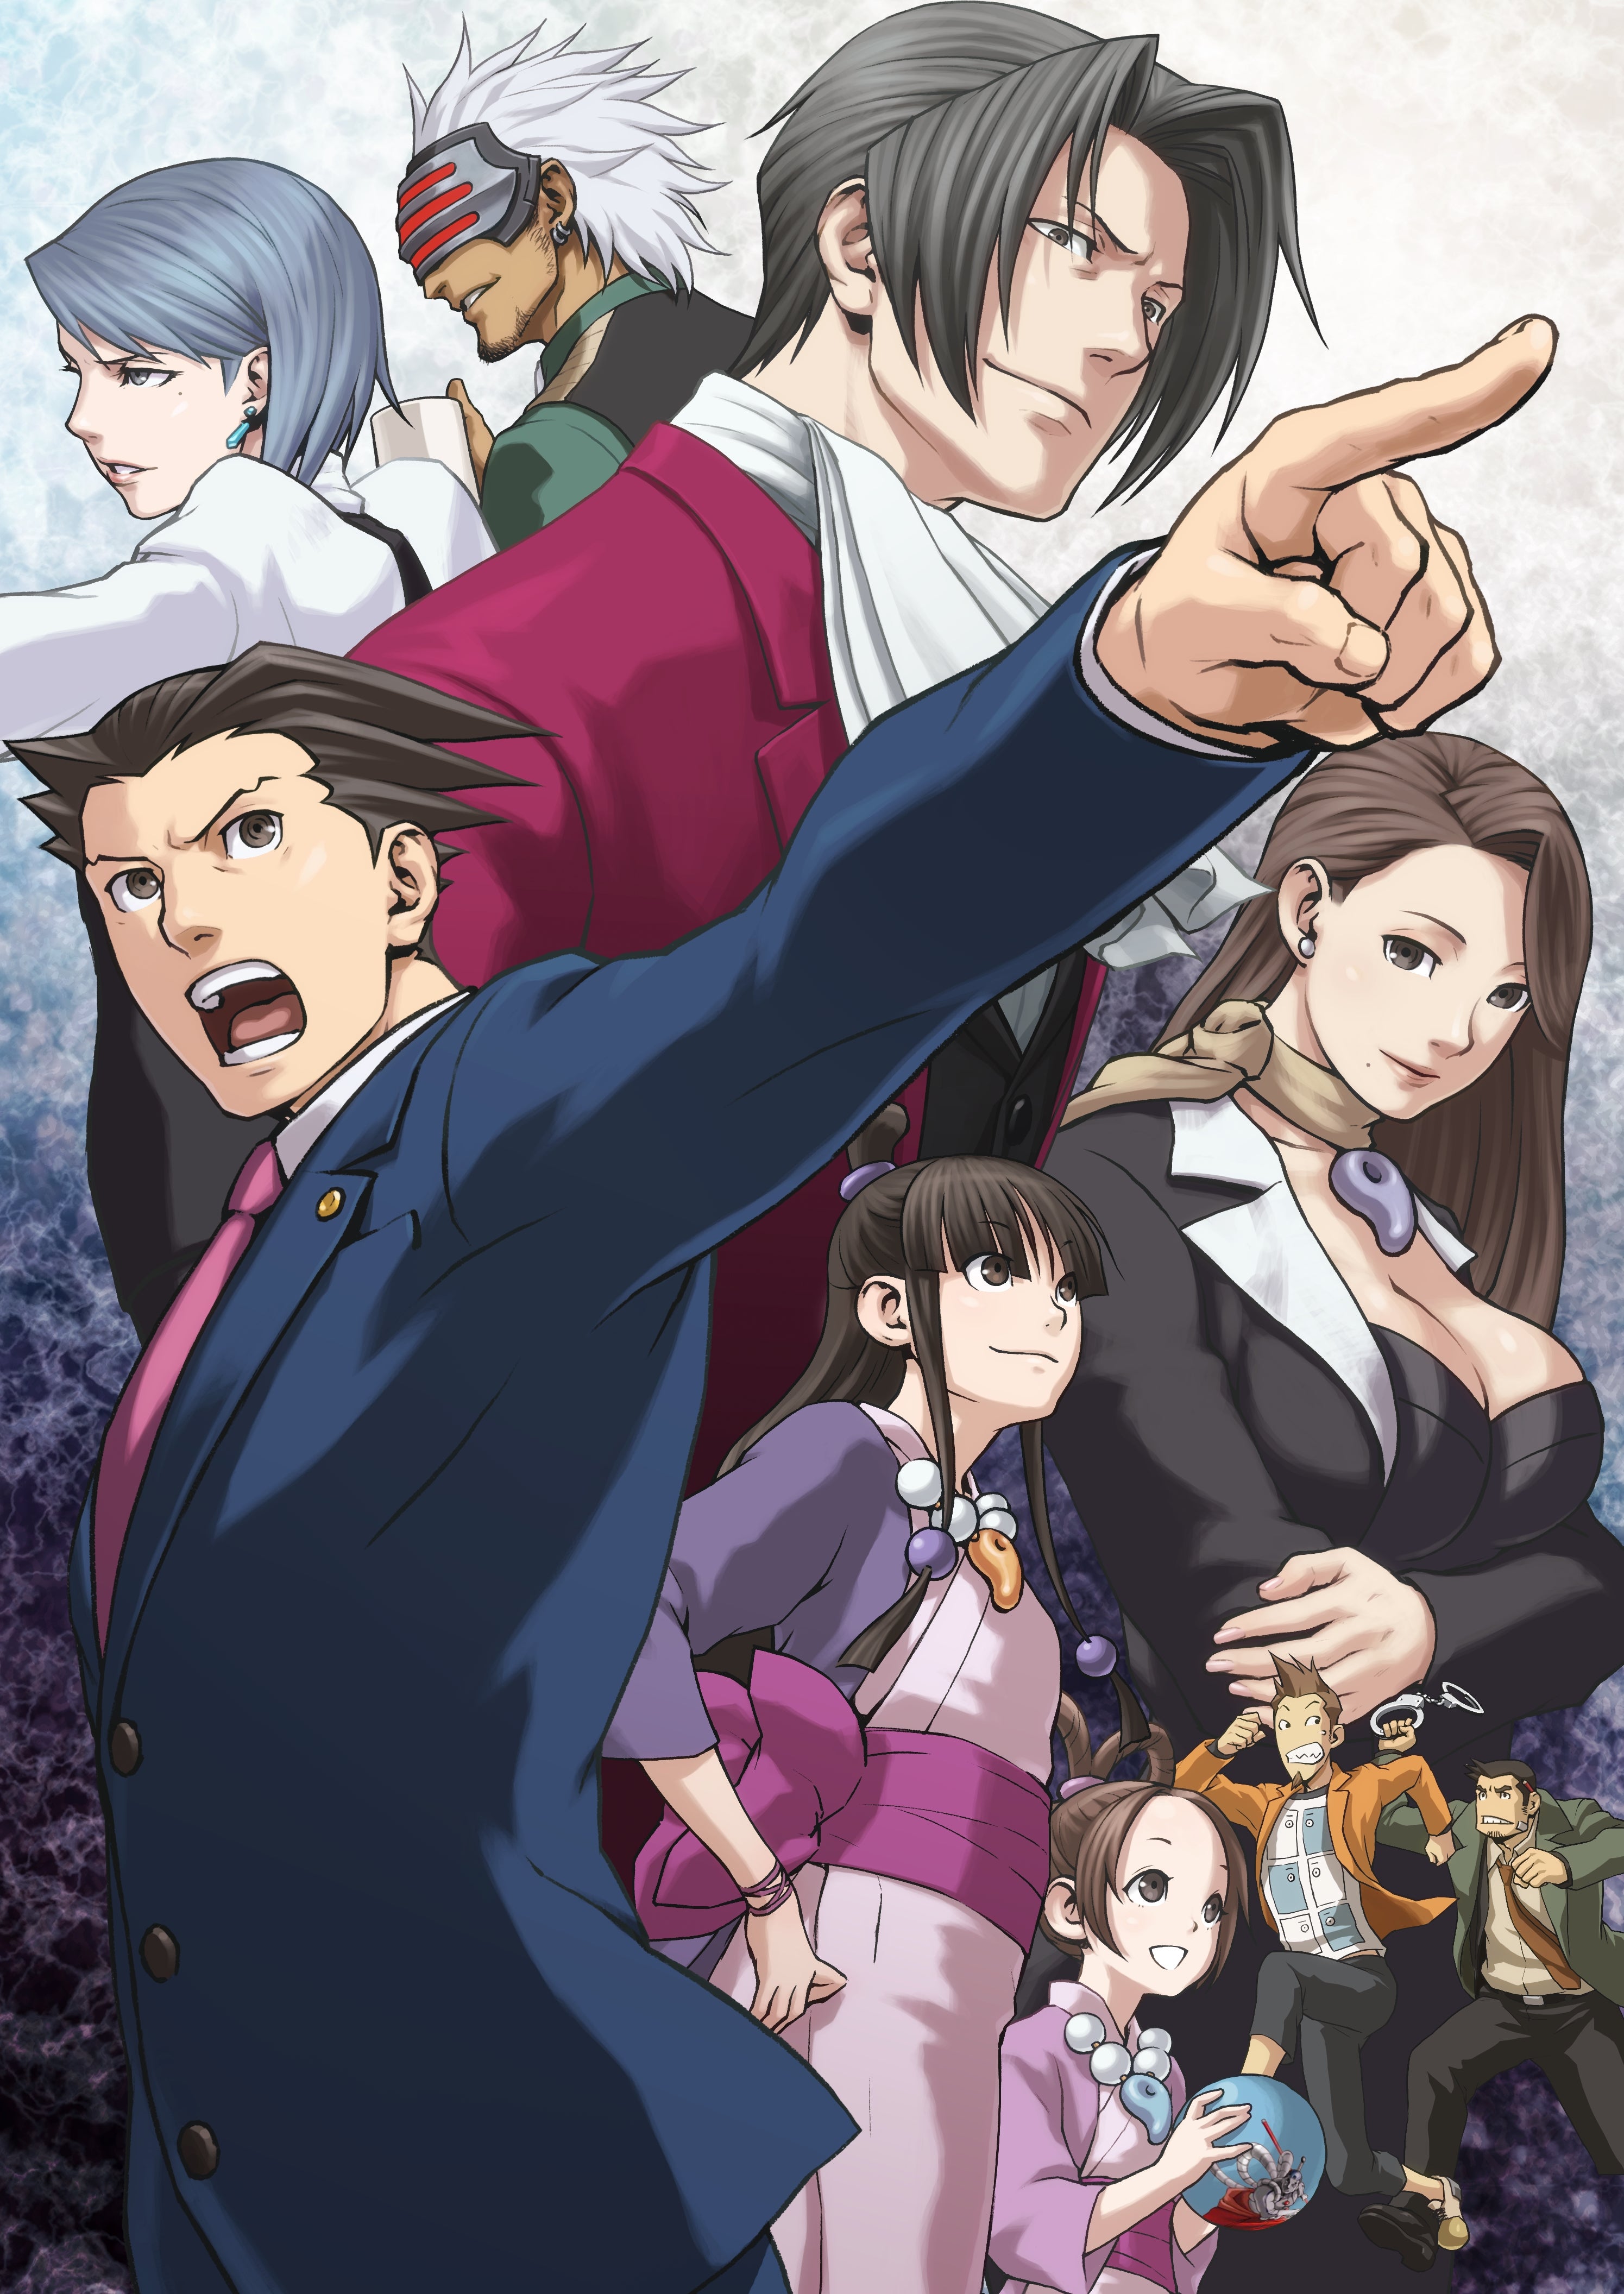 Phoenix Wright Ace Attorney Trilogy on Steam